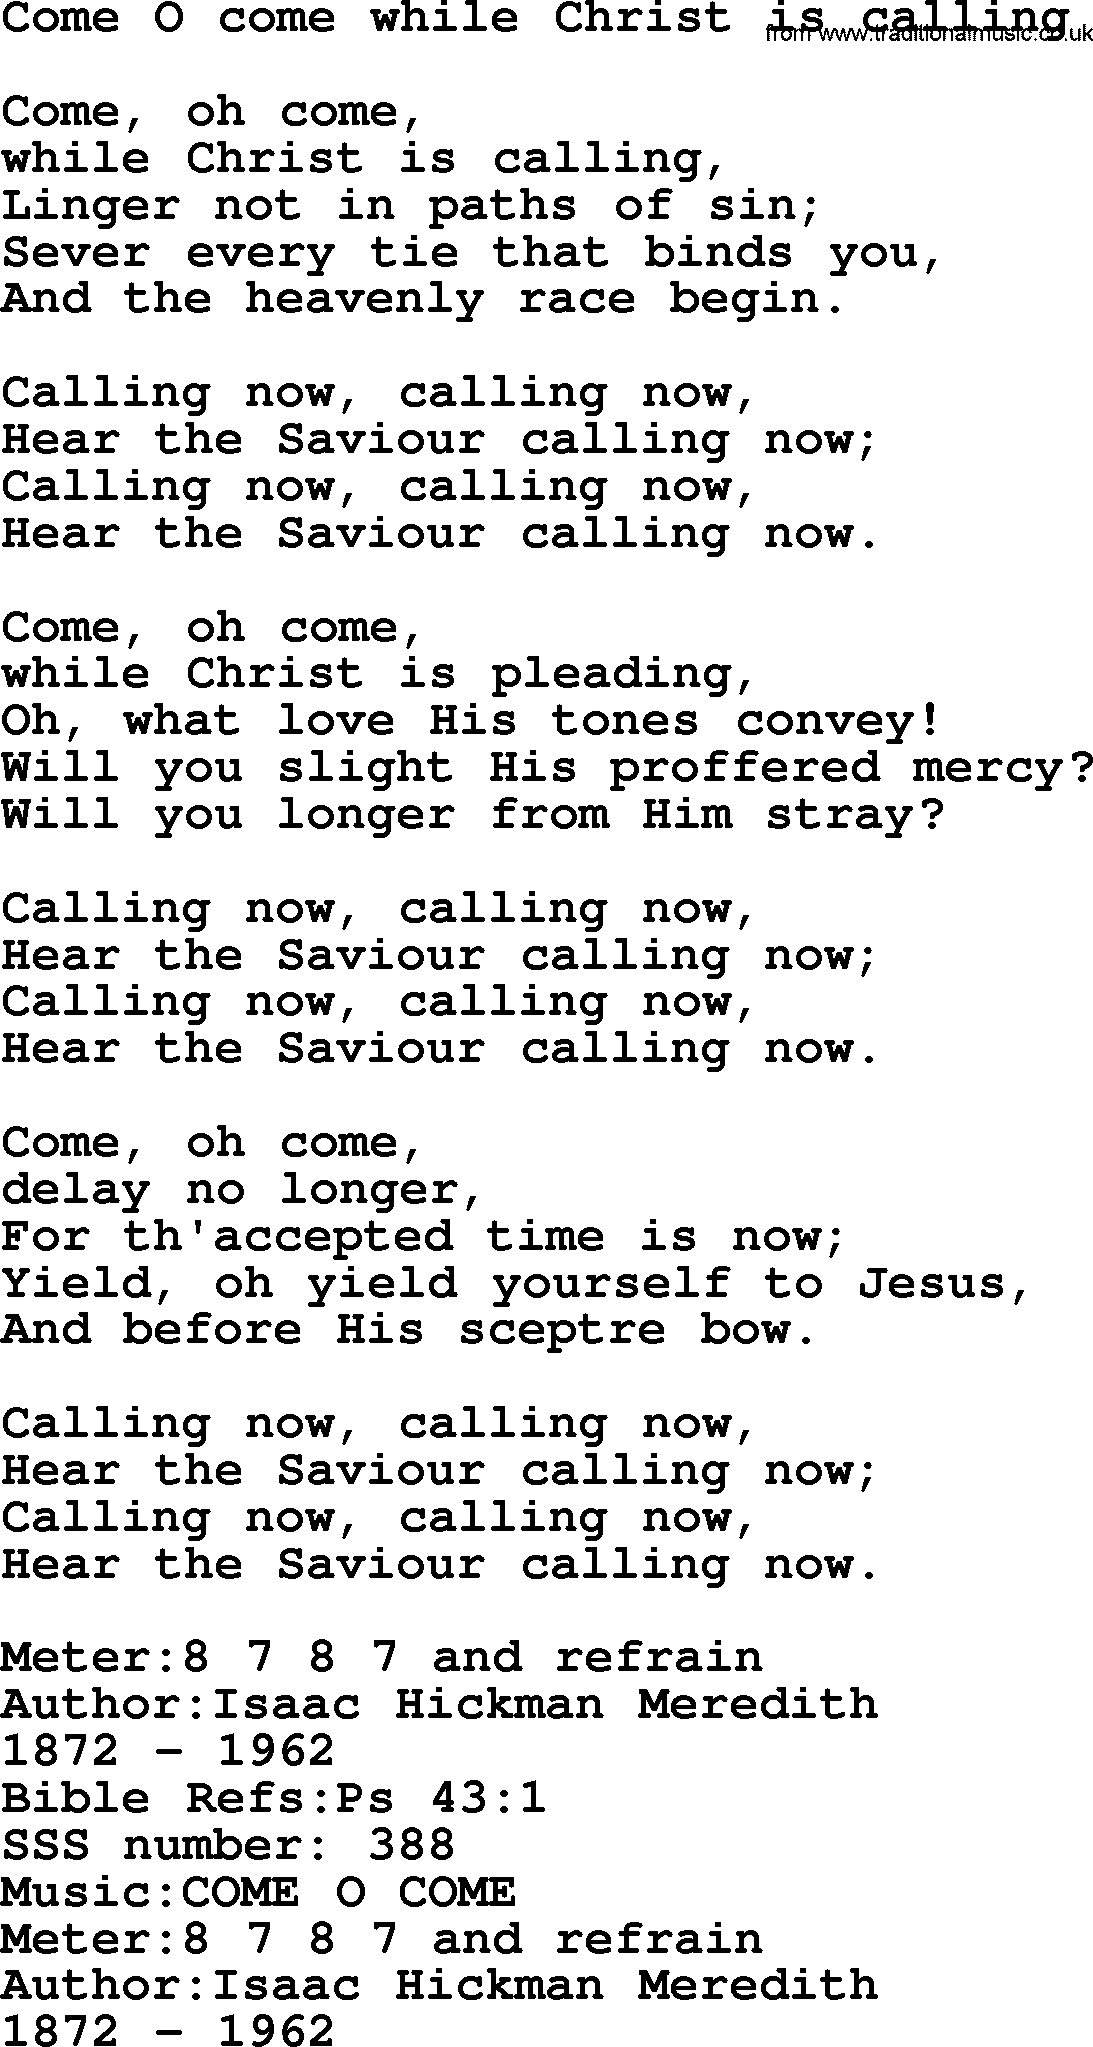 Sacred Songs and Solos complete, 1200 Hymns, title: Come O Come While Christ Is Calling, lyrics and PDF